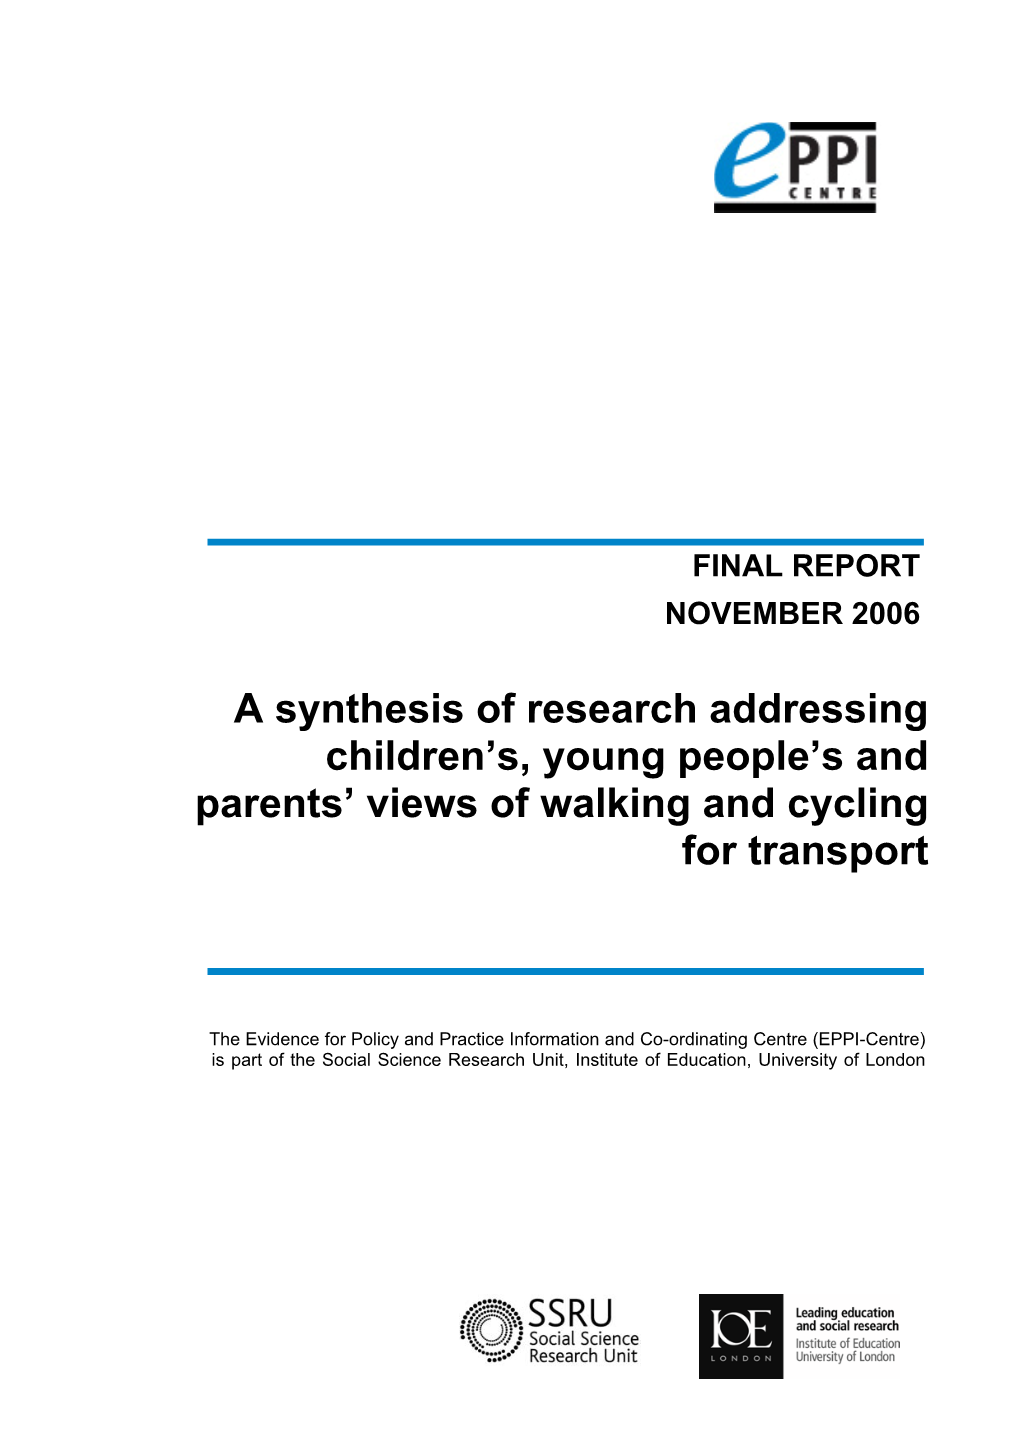 A Synthesis of Research Addressing Children's, Young People's And